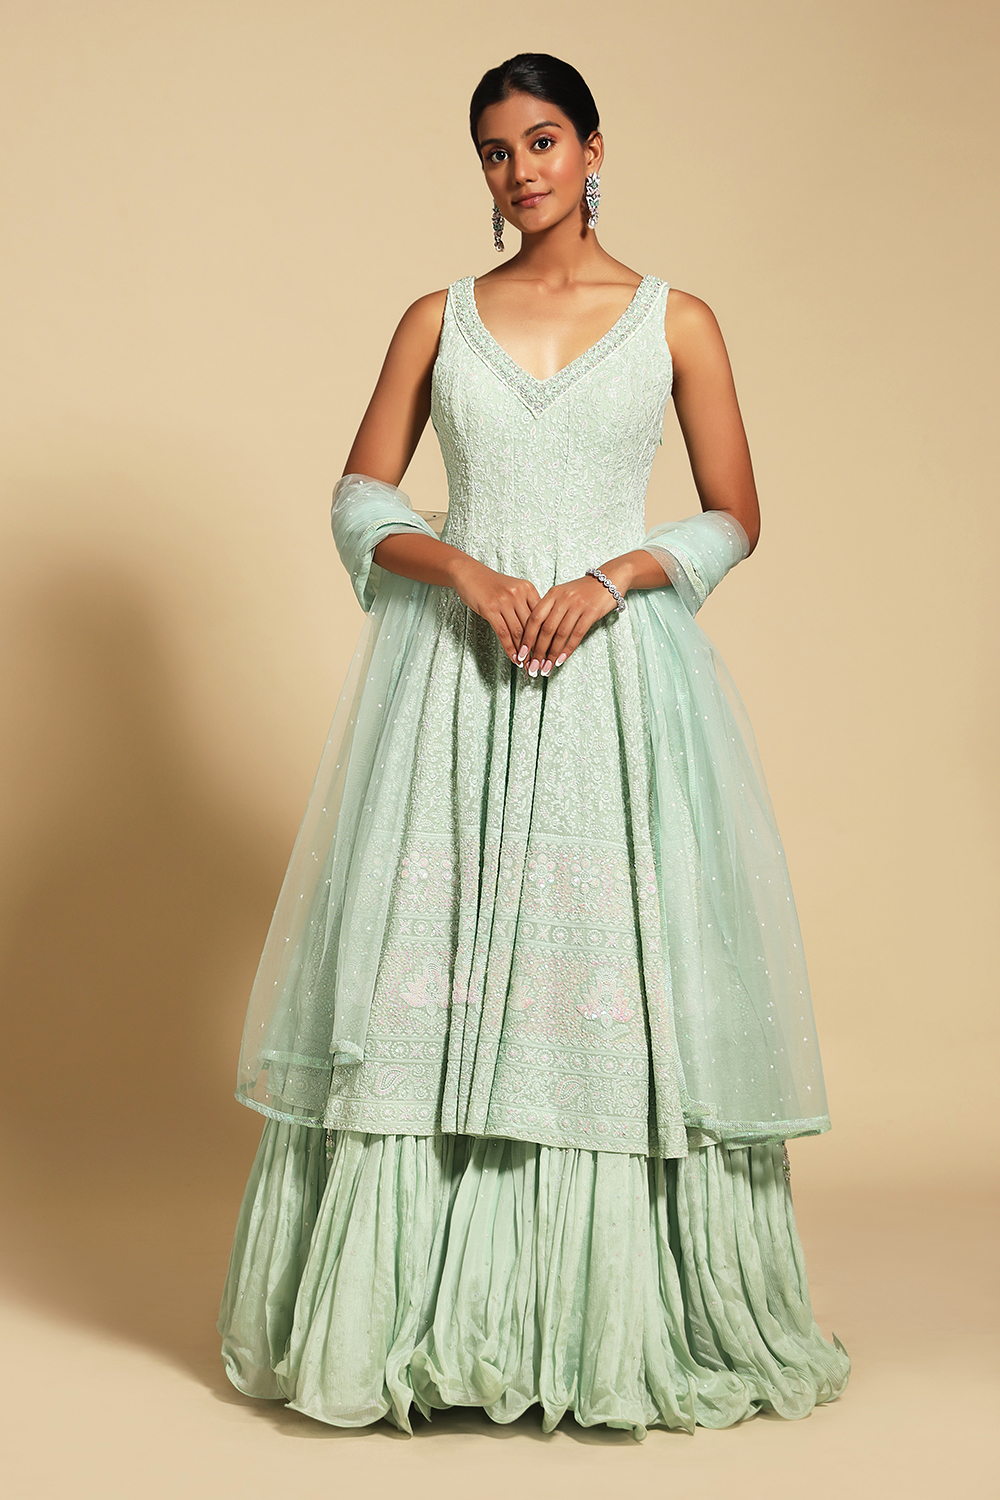 Season's 7 Most Trendy Gowns To Rock Your Party | Kalki Fashion Blog